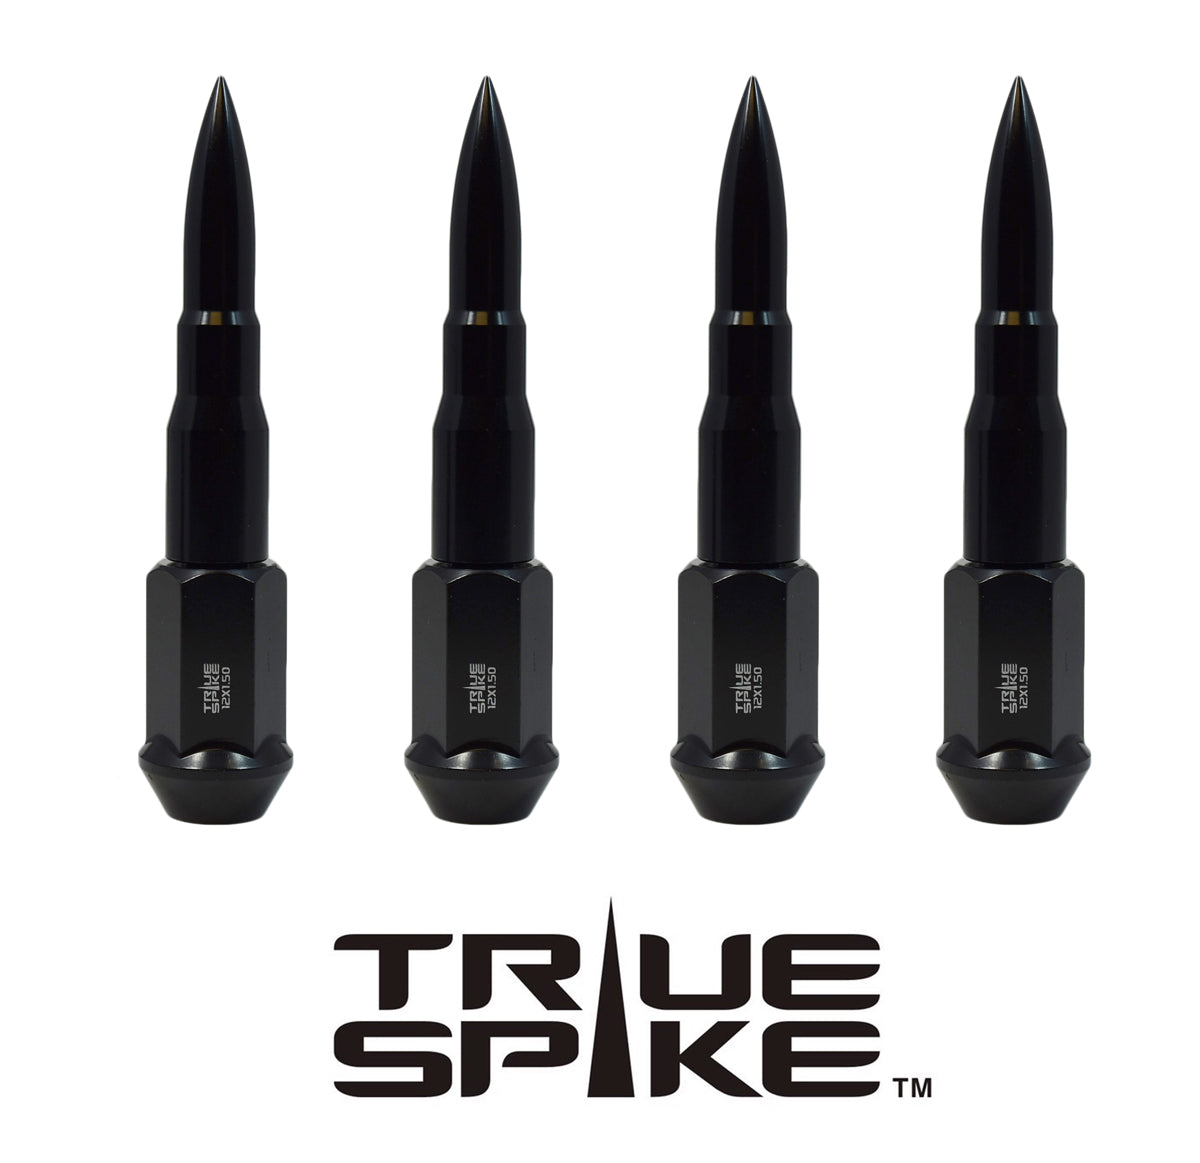 1/2-20 112MM LONG SPIRAL SPIKE FORGED STEEL LUG NUTS ANODIZED ALUMINUM